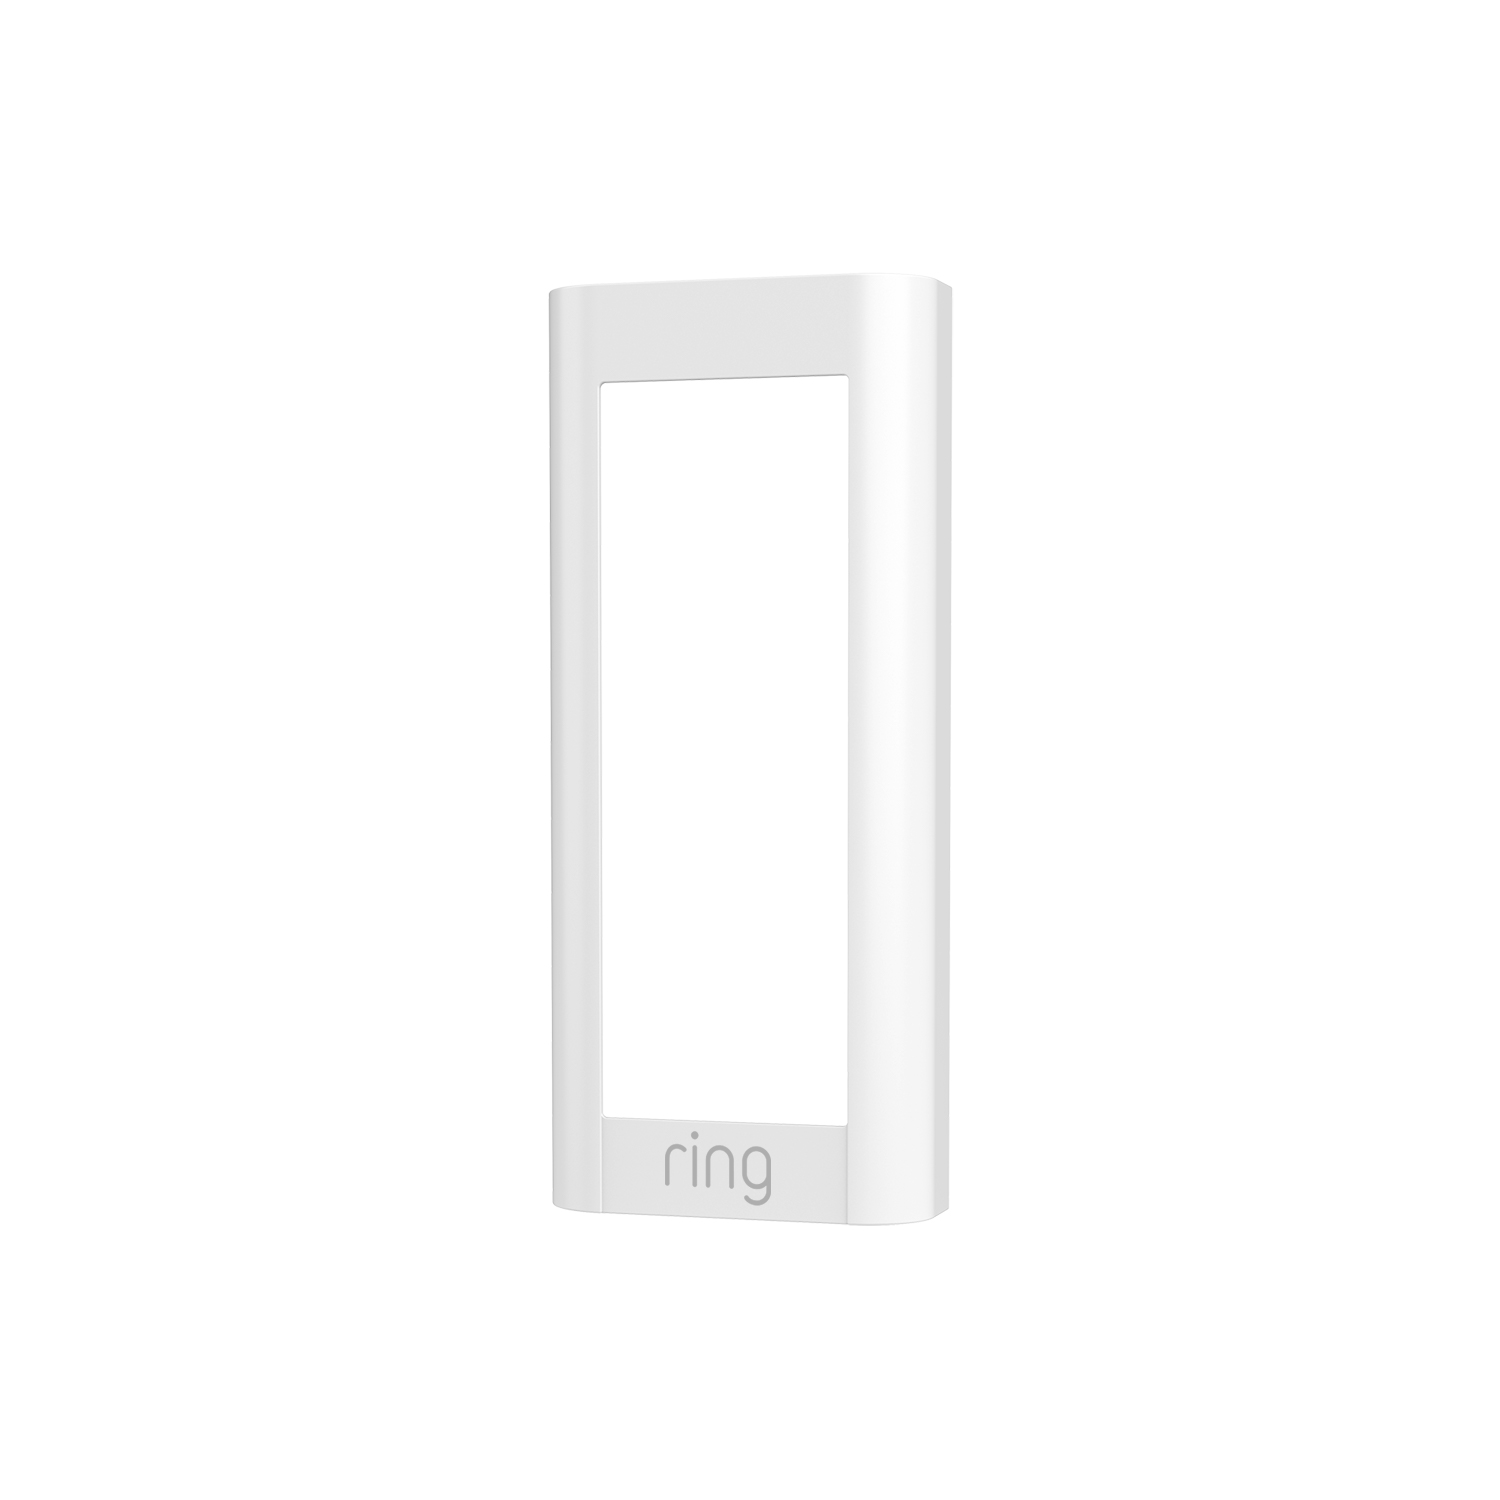 Interchangeable Faceplate (for Wired Doorbell Pro (Video Doorbell Pro 2)) - White:Interchangeable Faceplate (for Wired Doorbell Pro (Video Doorbell Pro 2))